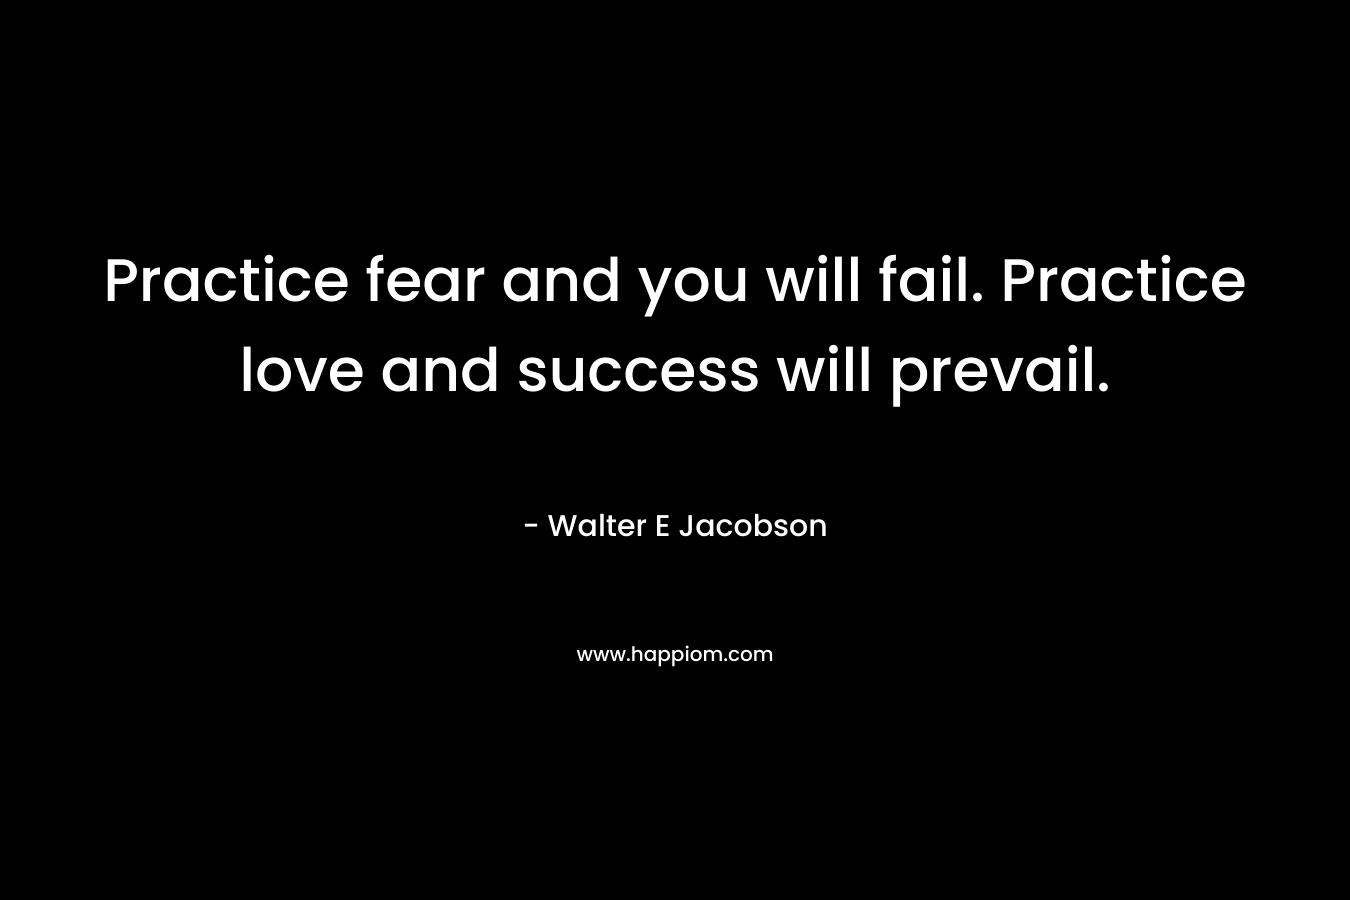 Practice fear and you will fail. Practice love and success will prevail.